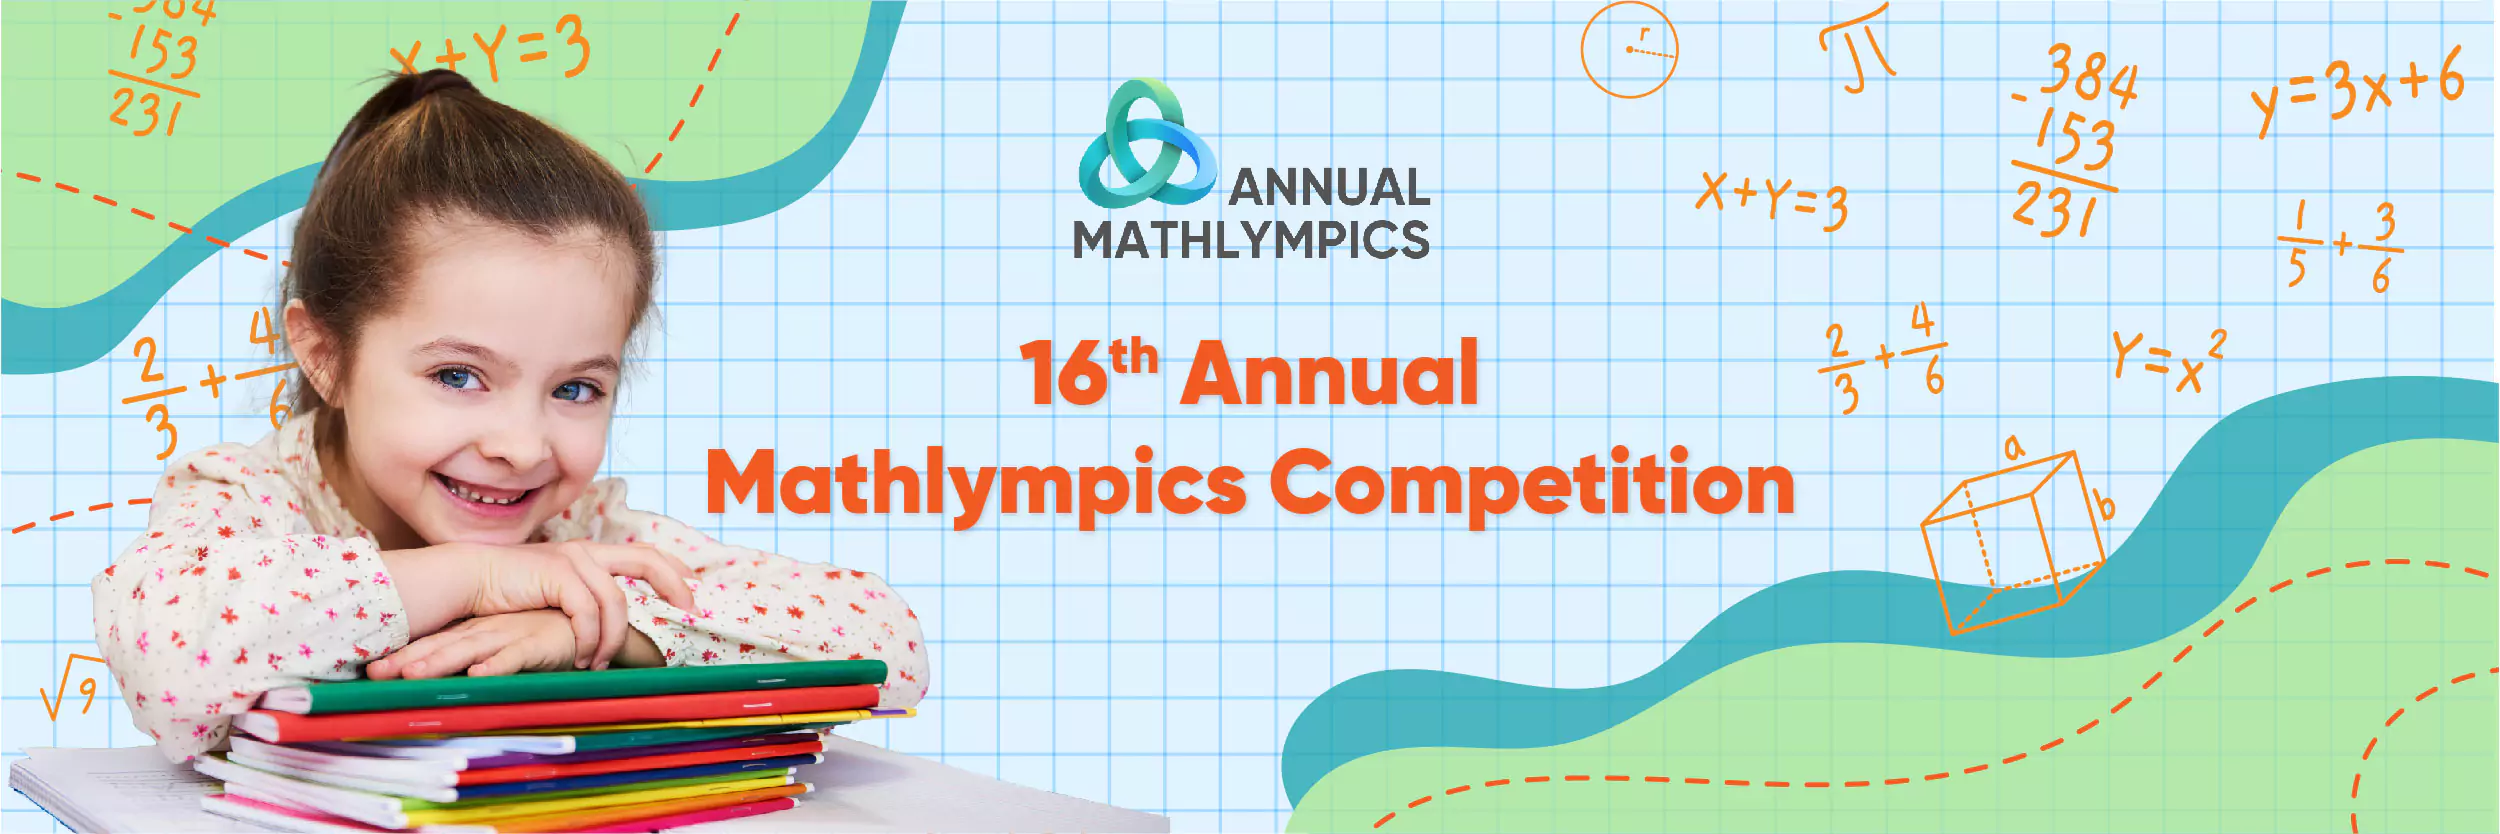 16th Annual Mathlympics Competition